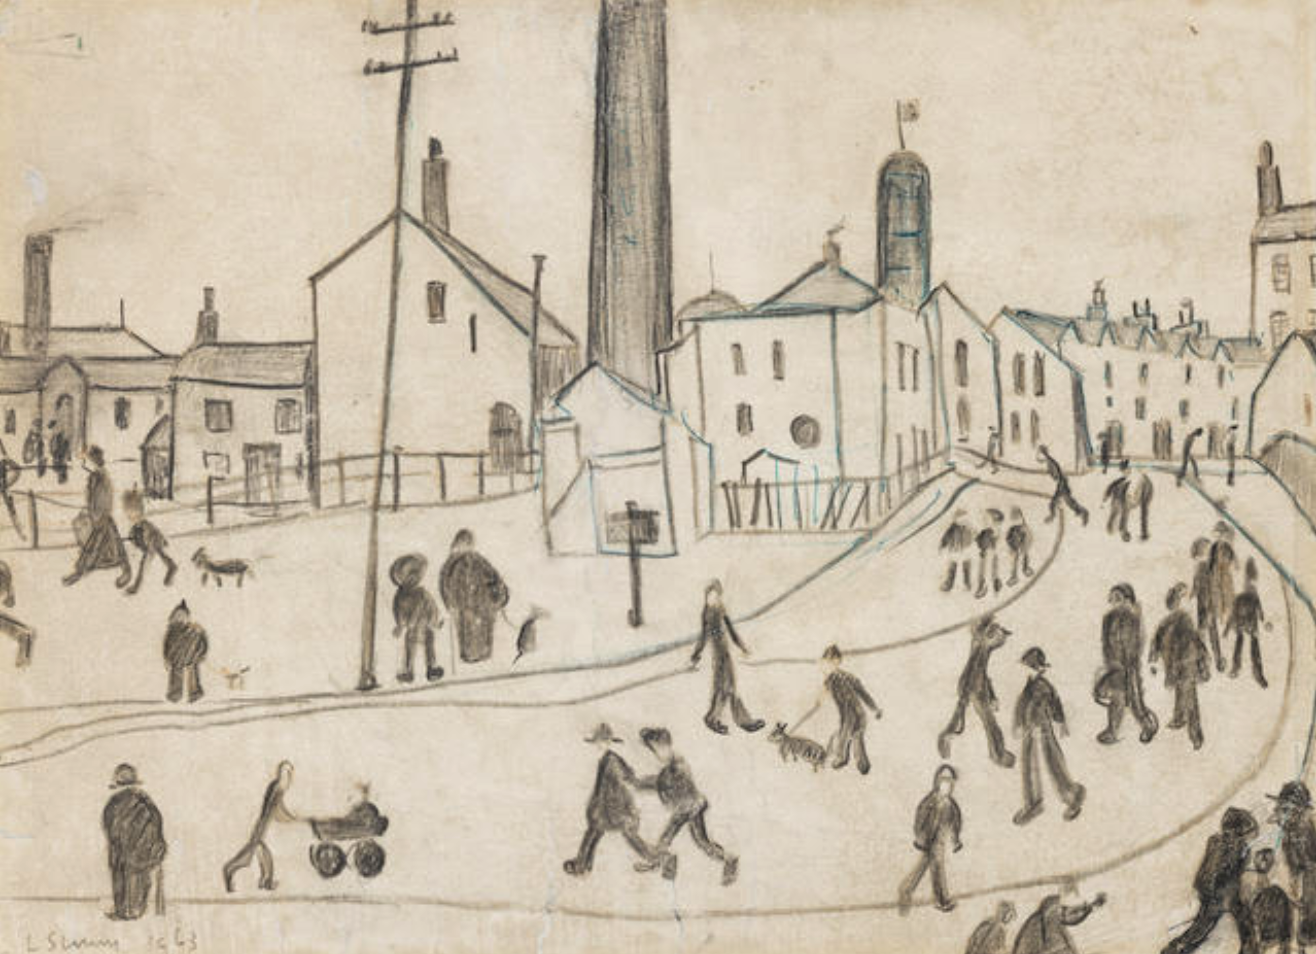 Northern Street Scene (1963) by Laurence Stephen Lowry (1887 - 1976), English artist.